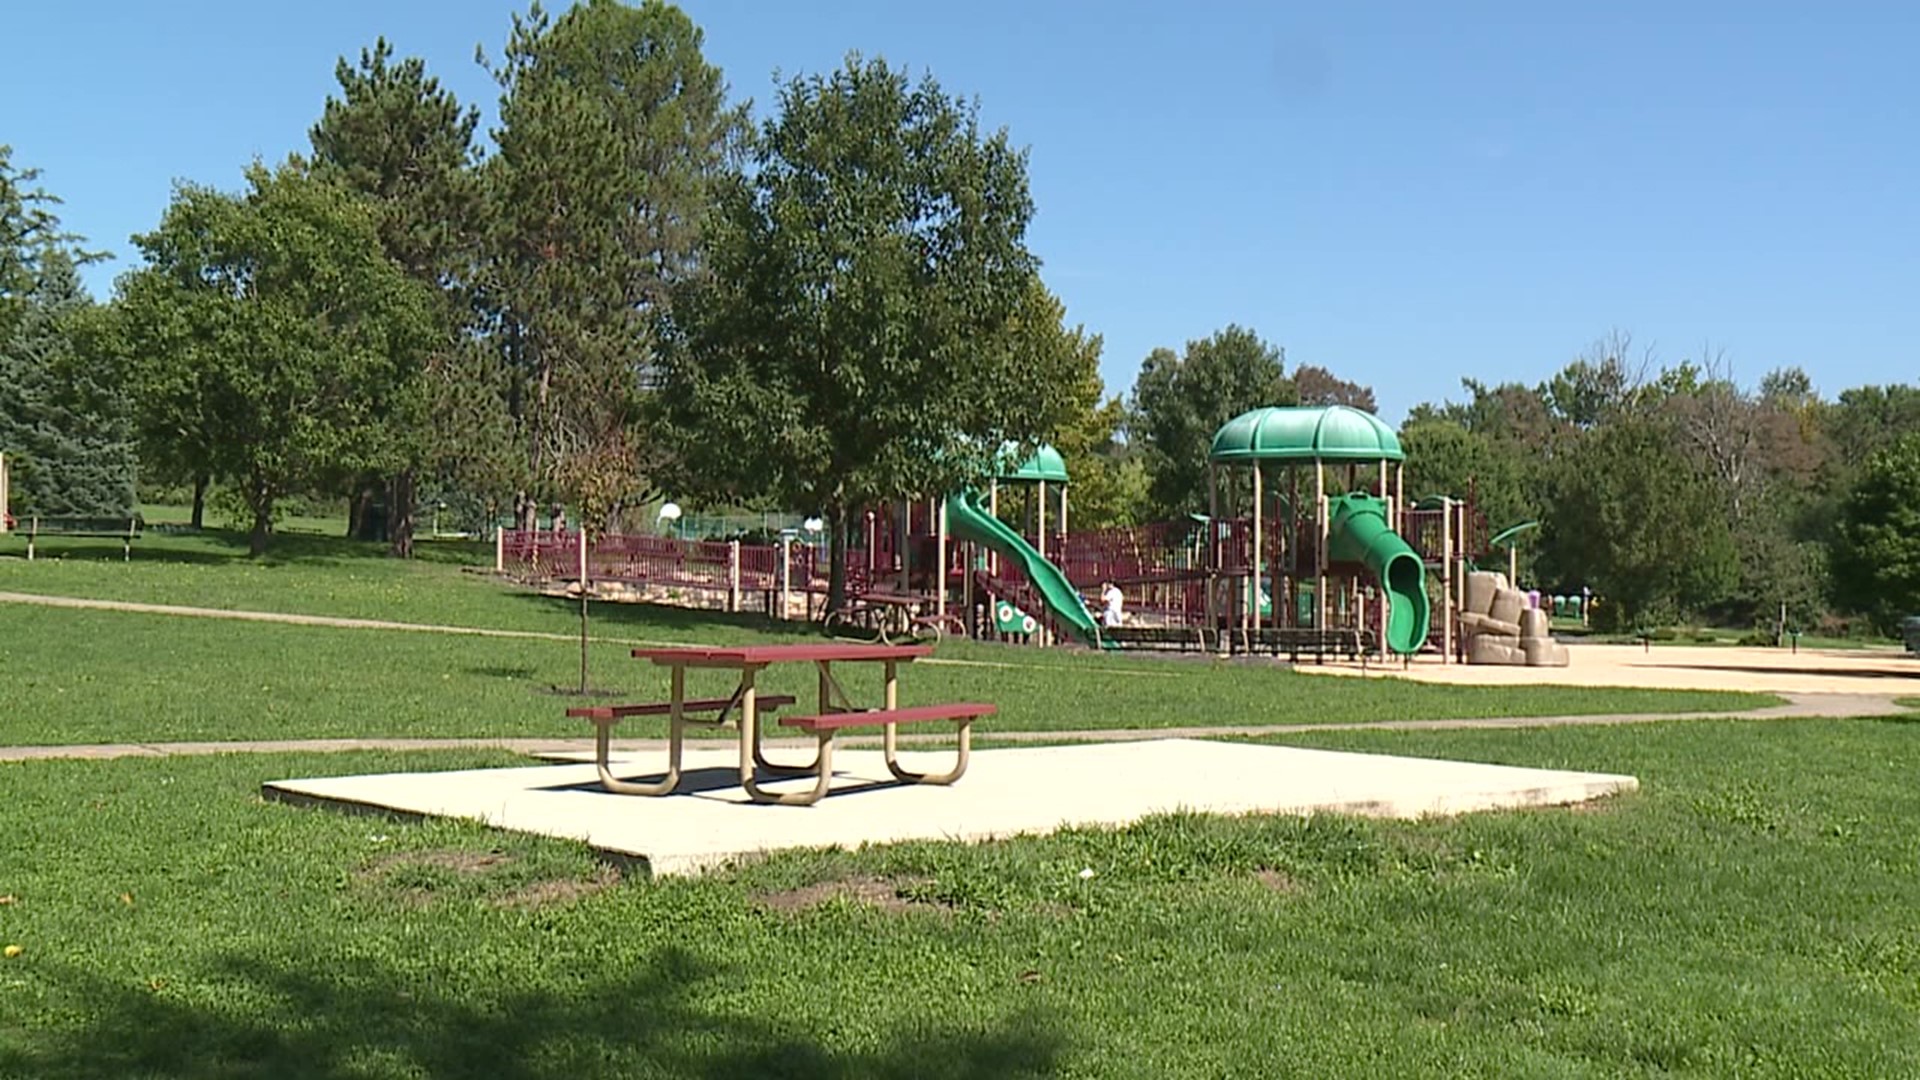 Authorities in Lackawanna County hope the added safety measures will help curb crime in popular recreation areas.